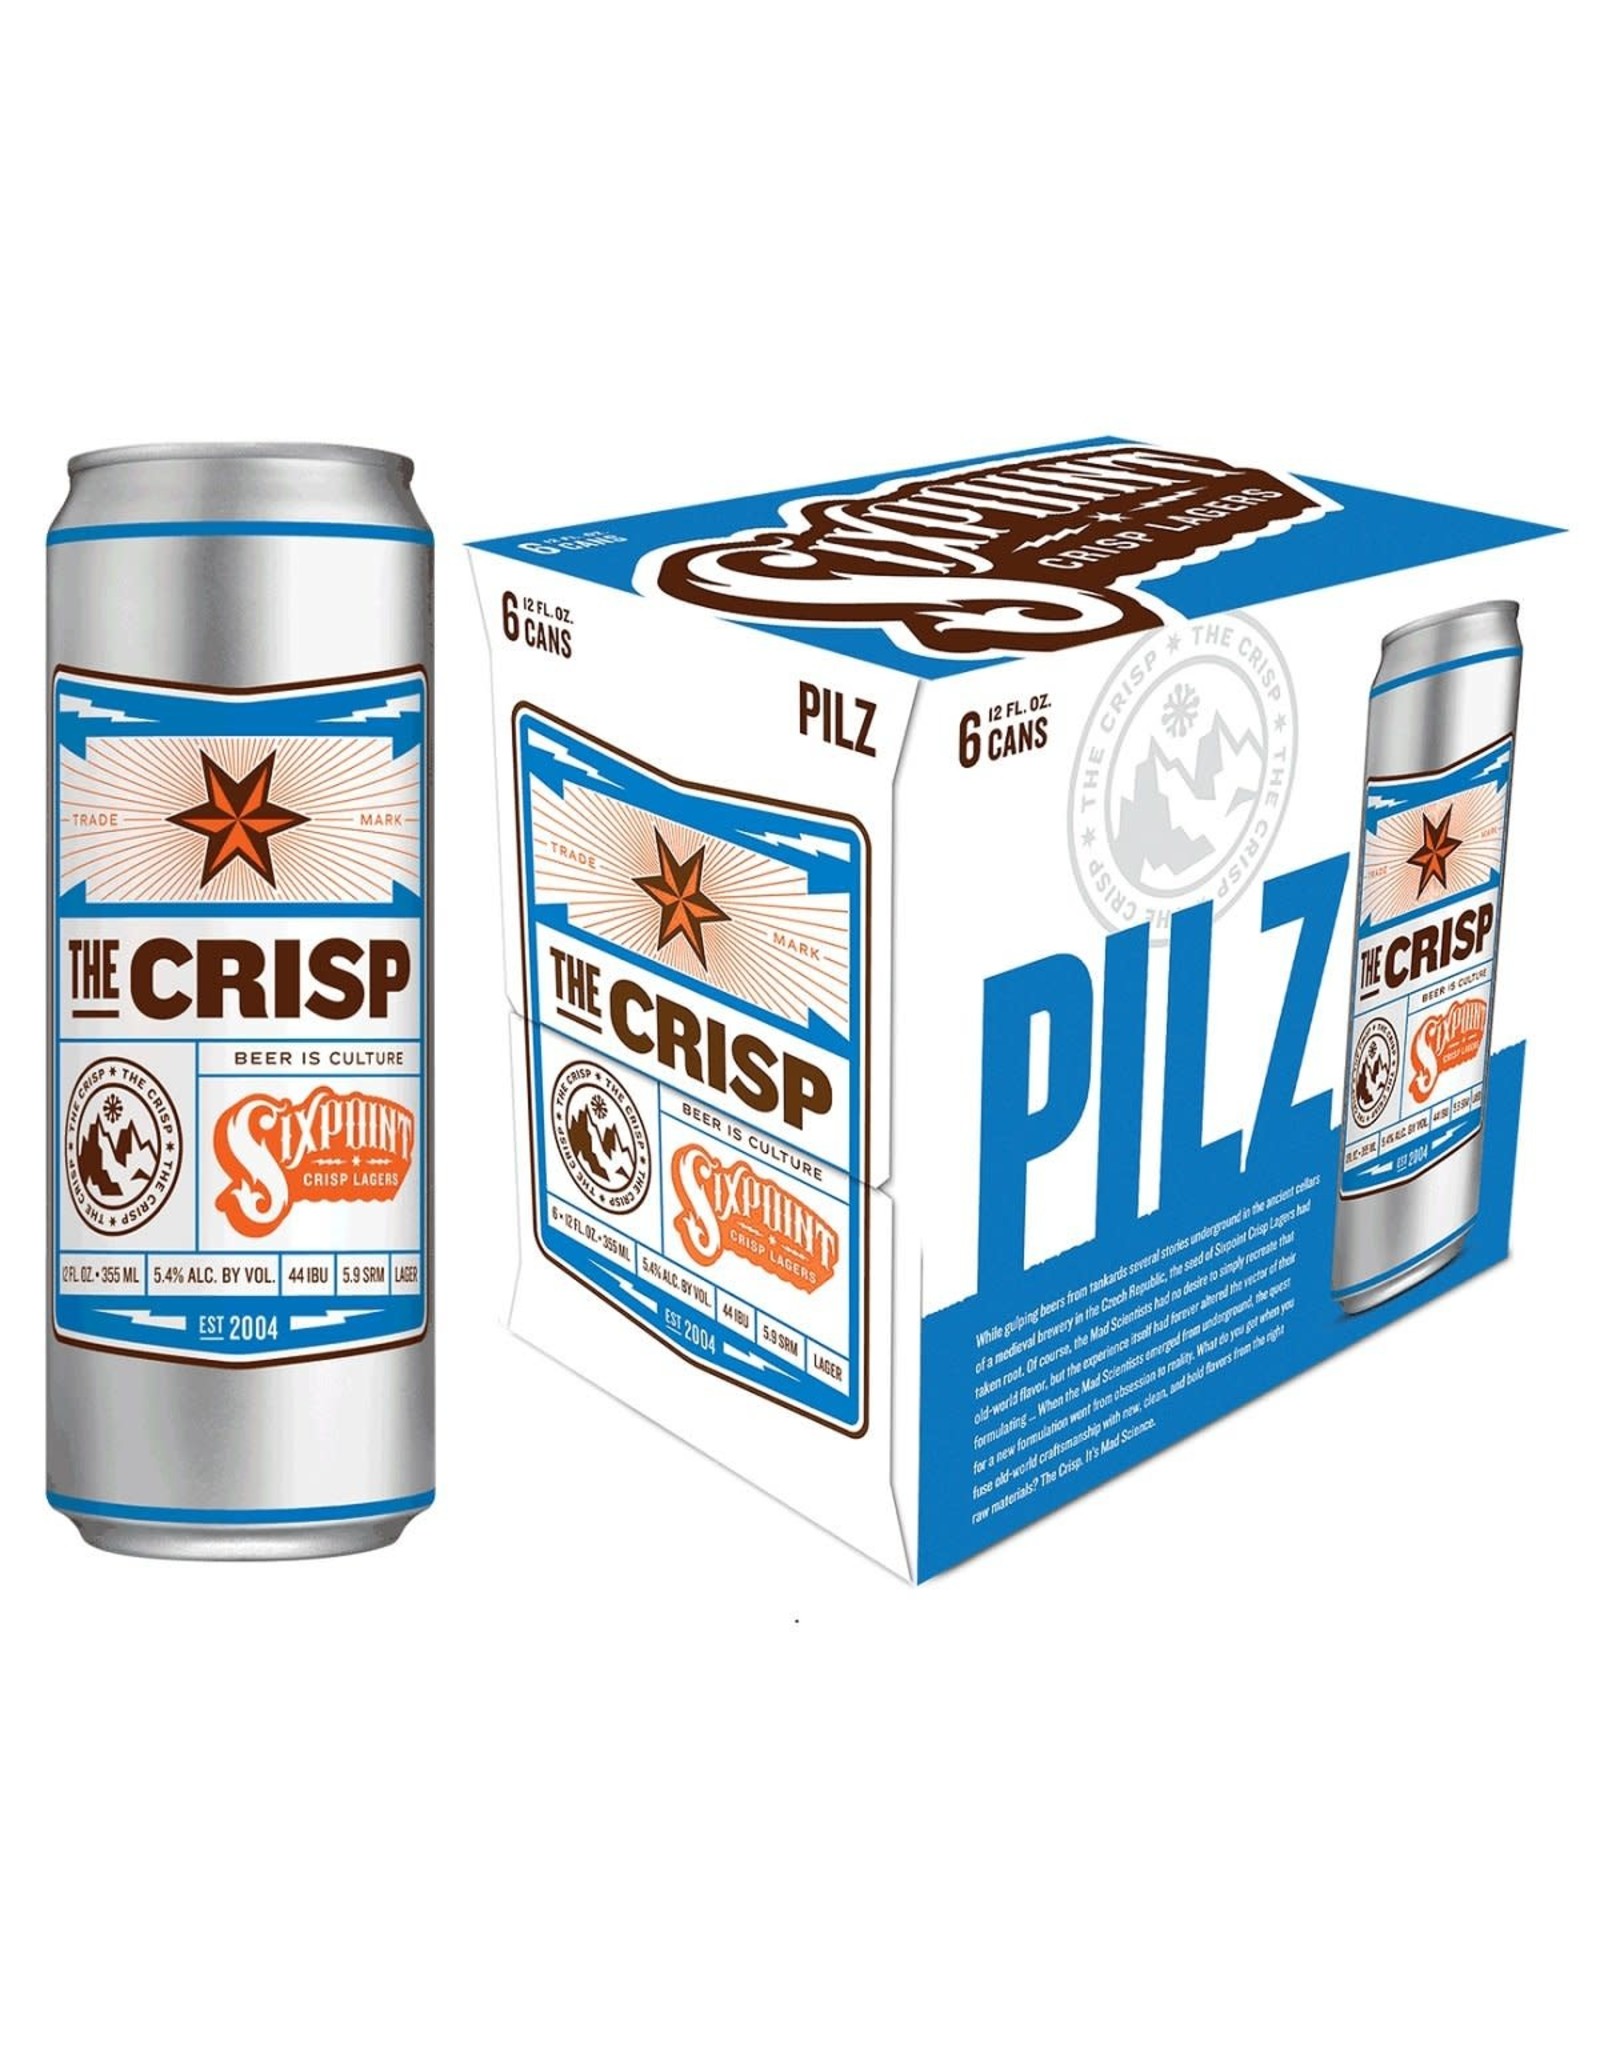 Sixpoint Brewery The Crisp Pilz 6 Cans/Pack